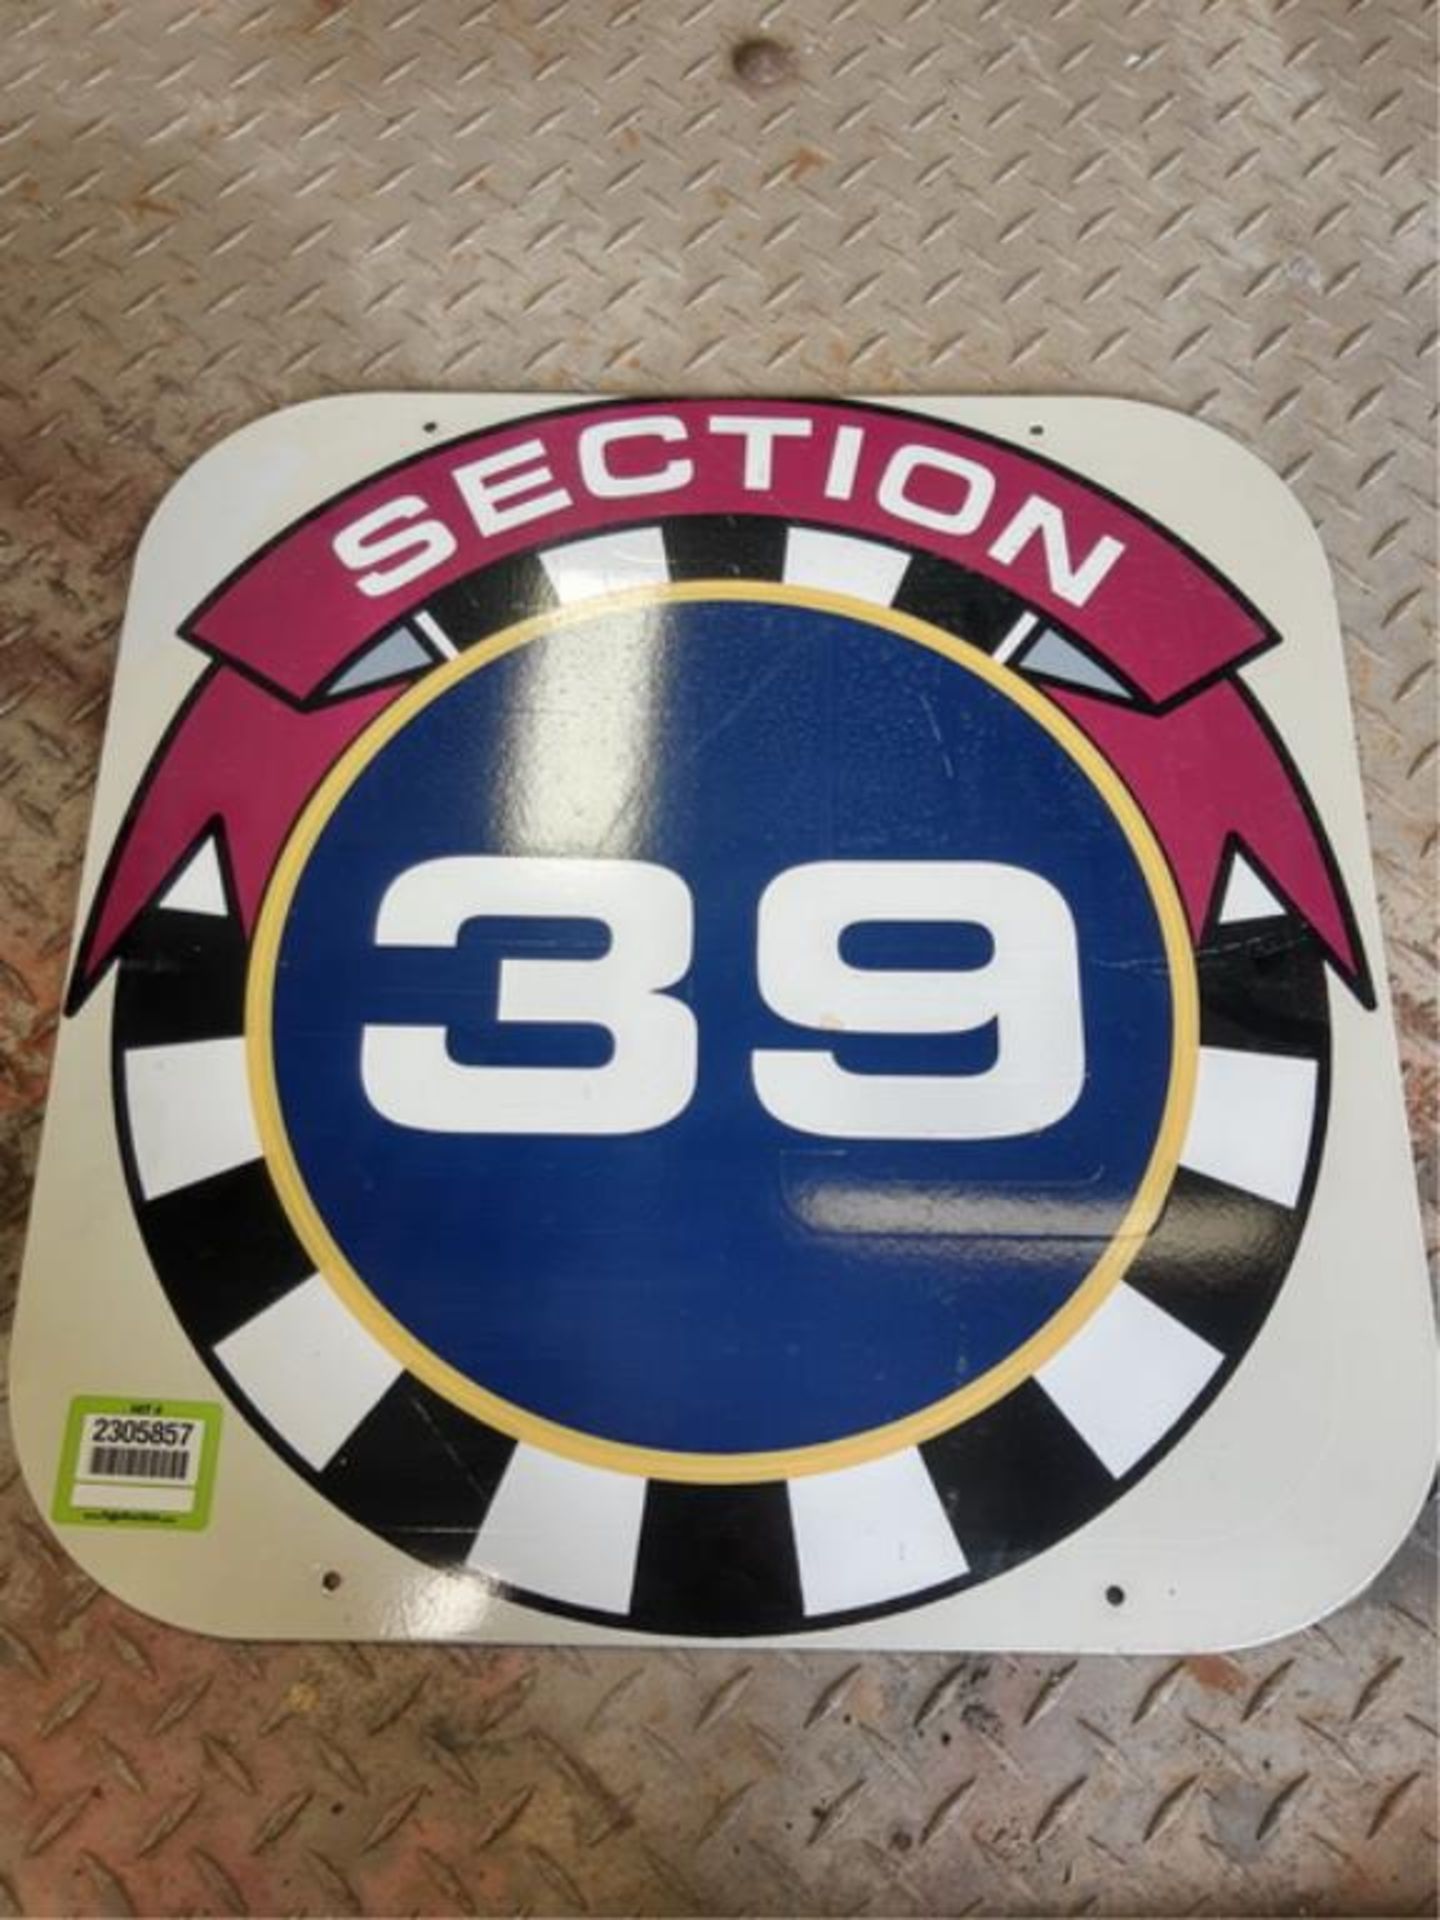 Section 39 Sign